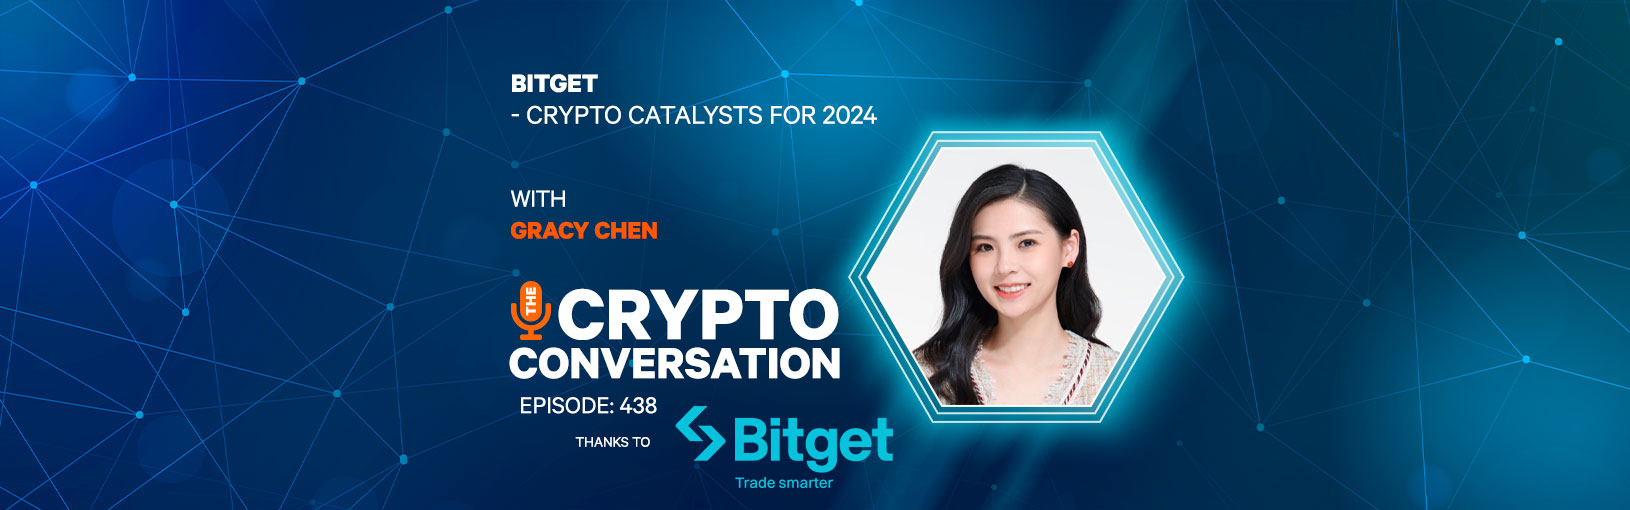 Bitget – Crypto Catalysts for 2024